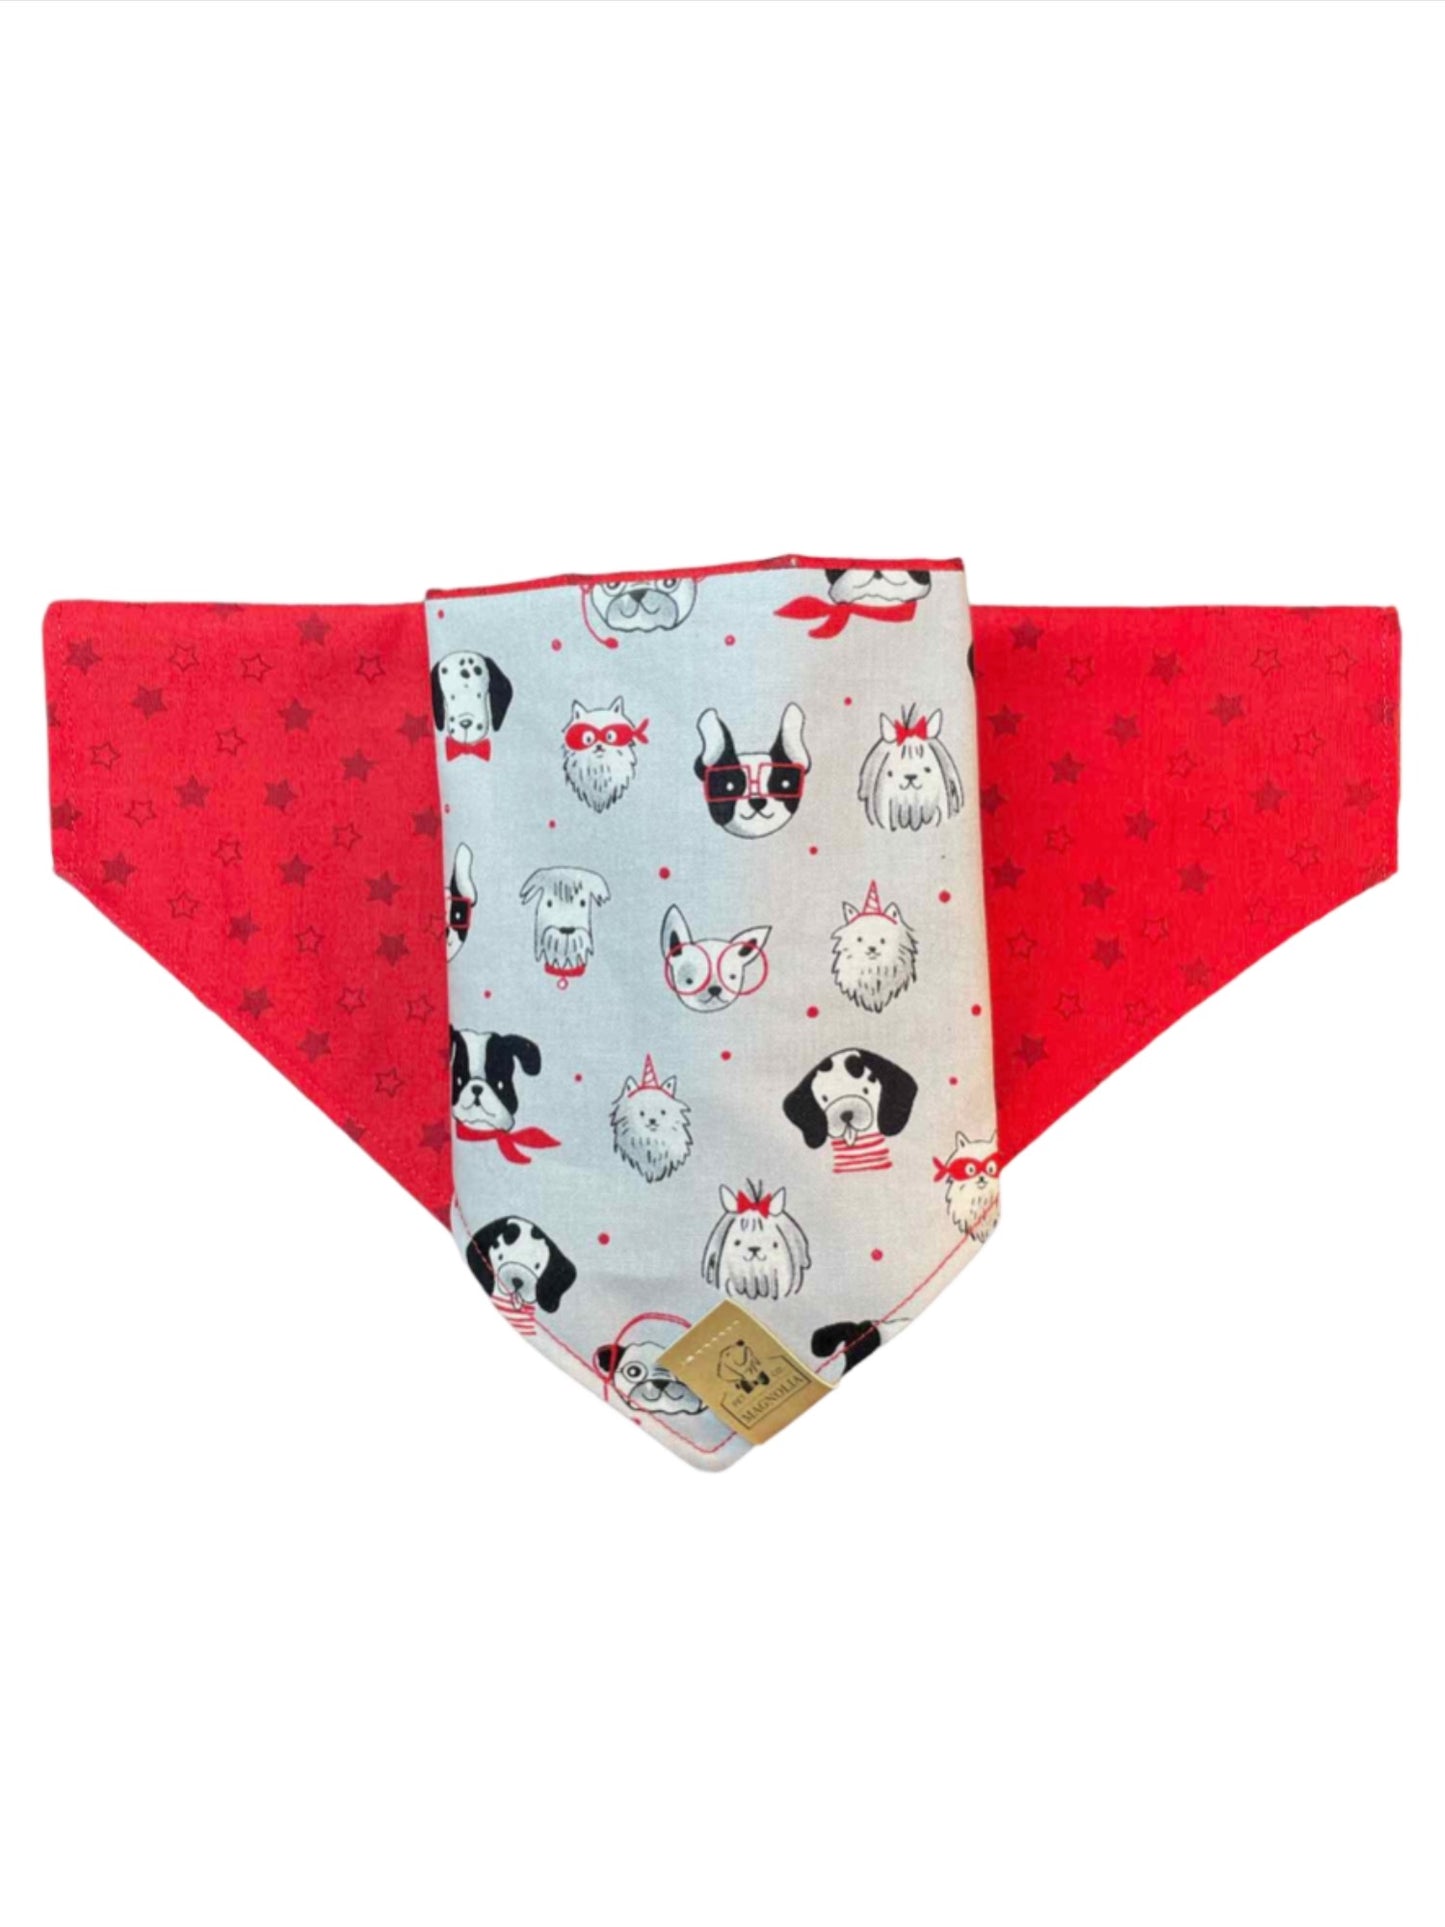 Puppies in Disguise Dog Bandana